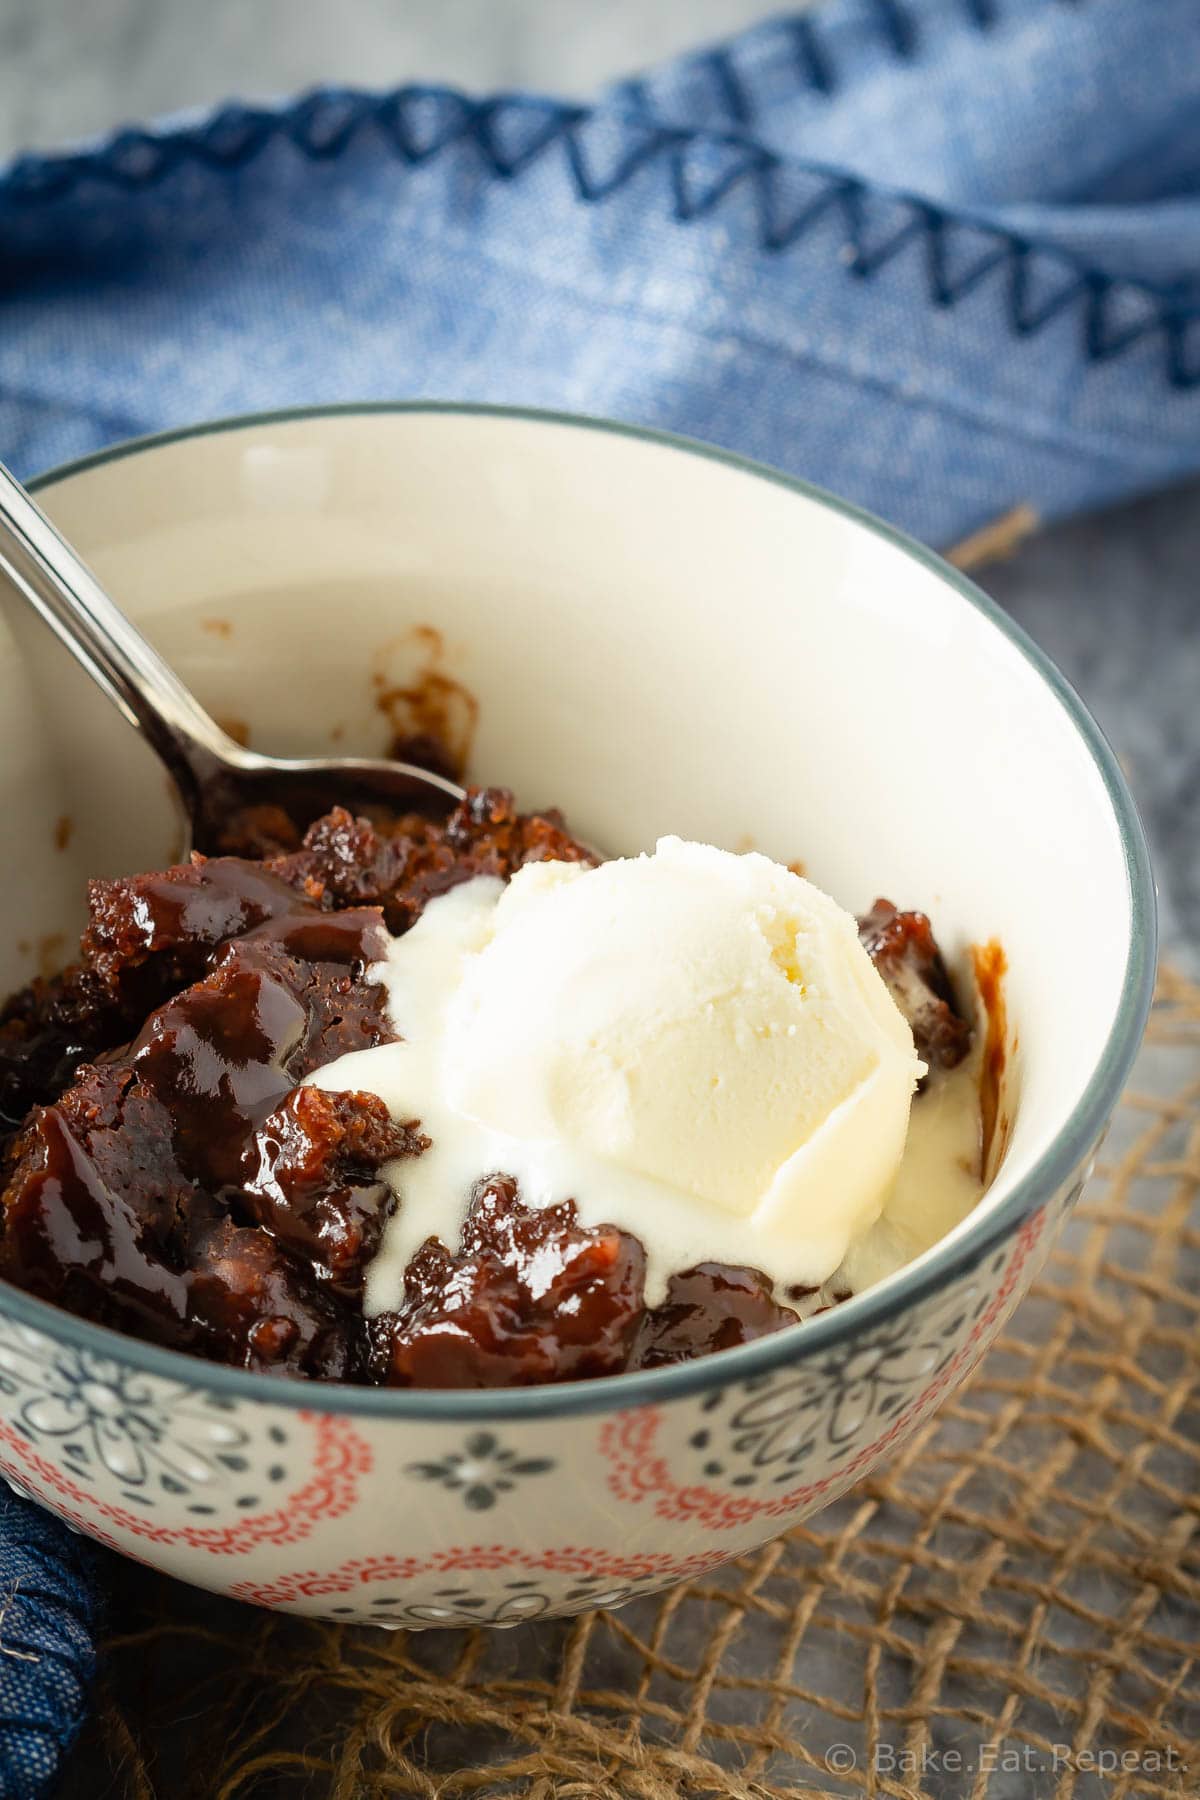 Slow Cooker Chocolate Pudding Cake - Bake. Eat. Repeat.